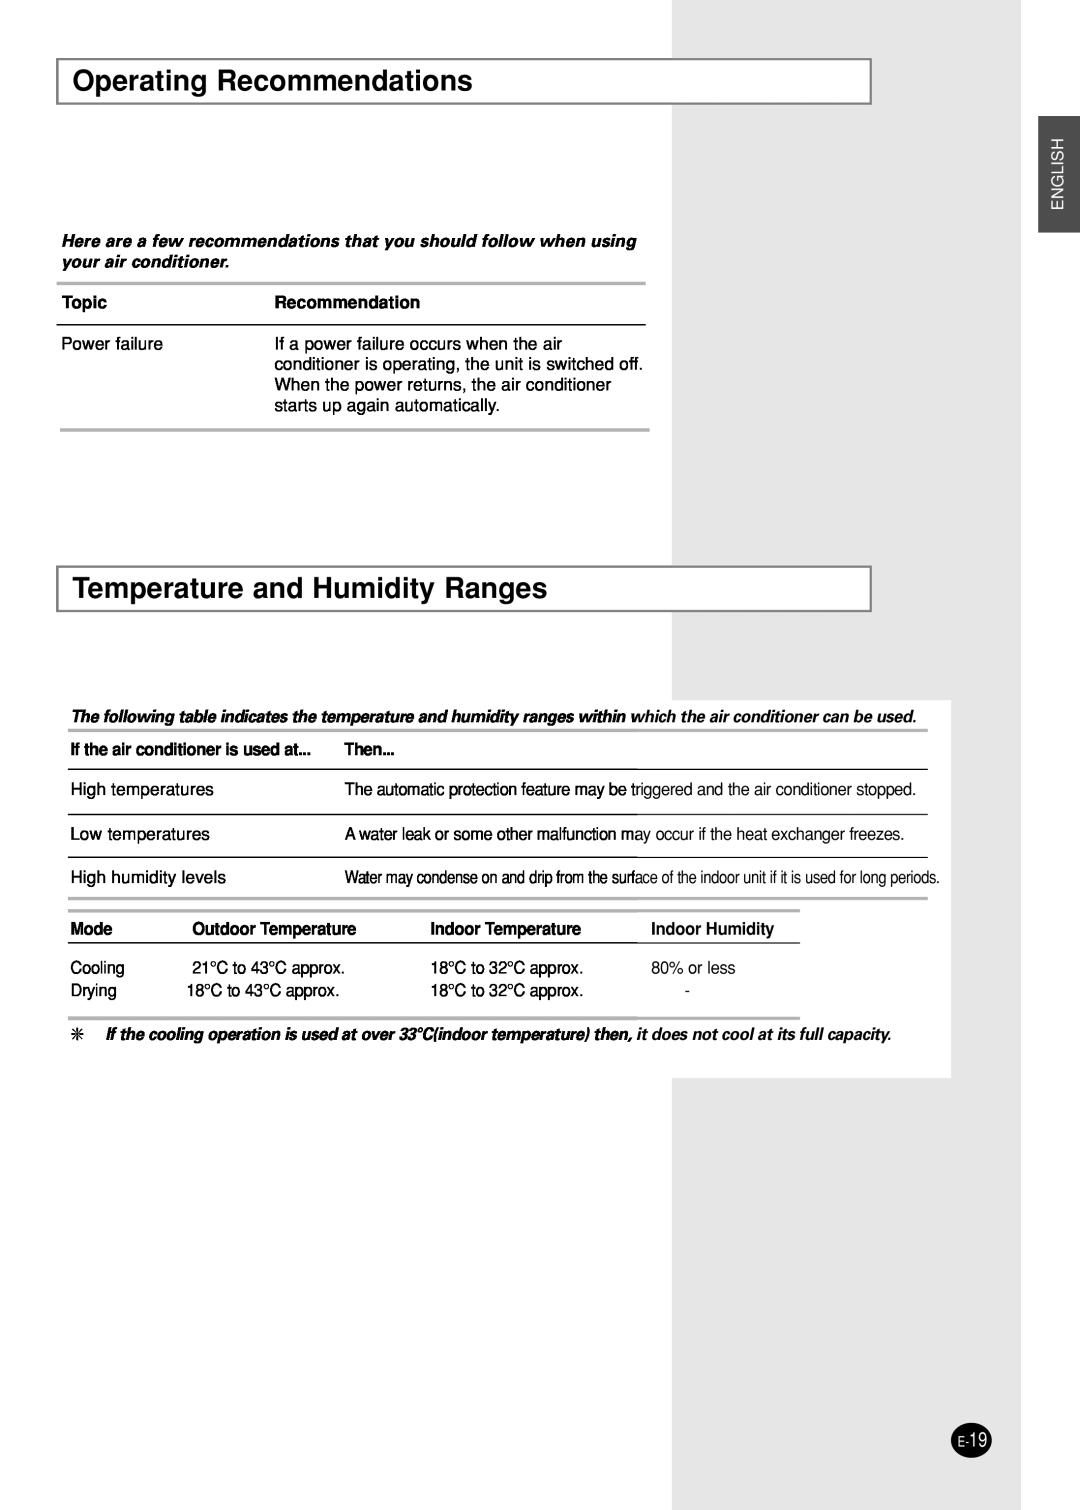 Samsung UST24S6GE Operating Recommendations, Temperature and Humidity Ranges, English, Topic, Then, Mode, Indoor Humidity 